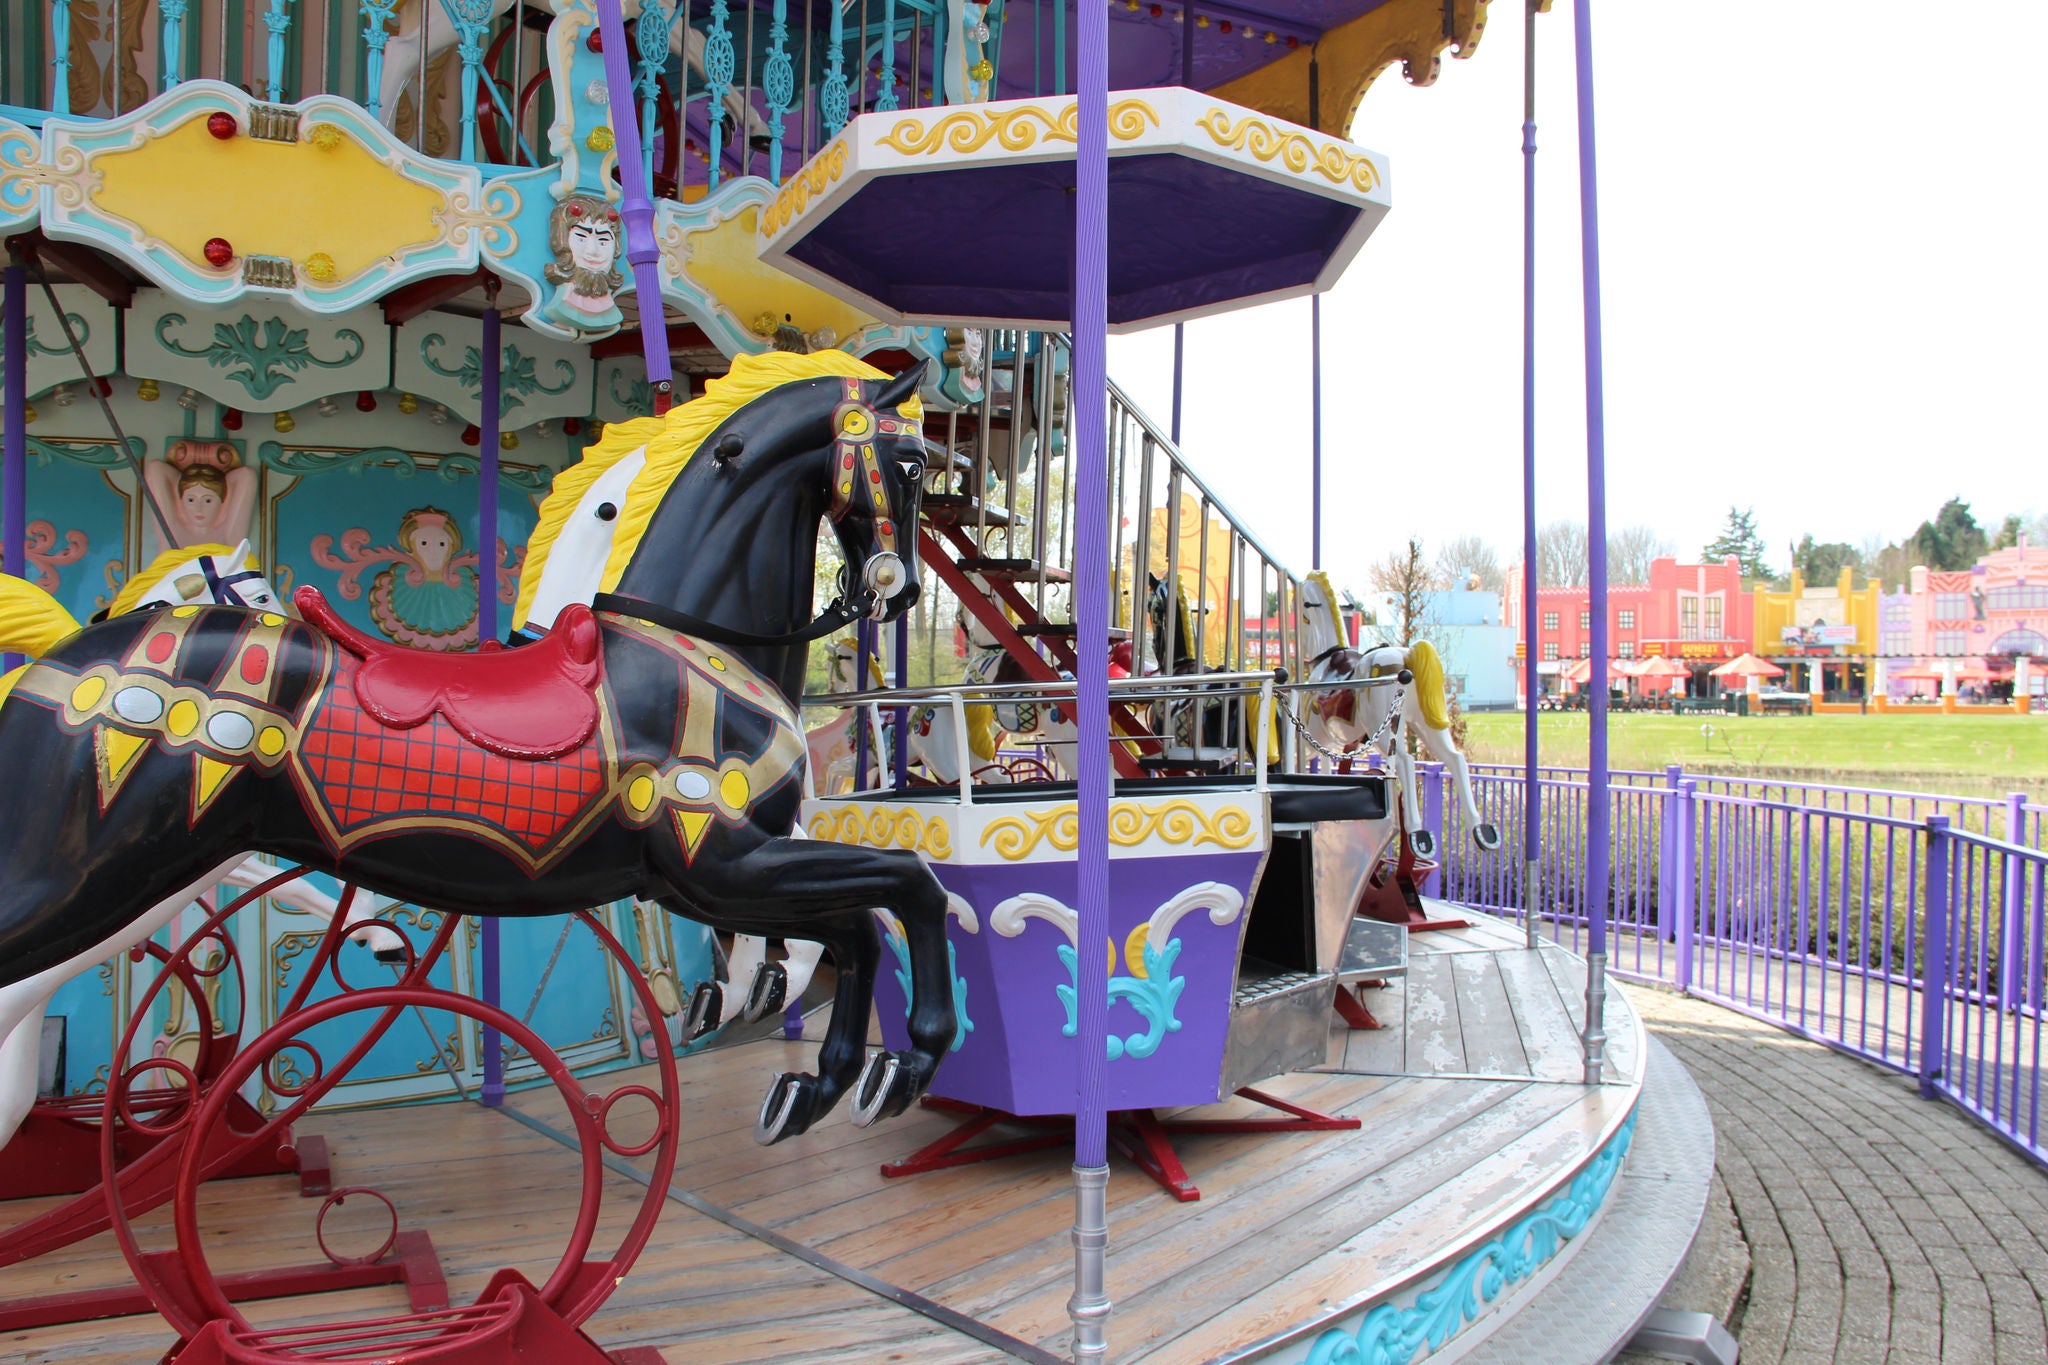 Poneys and other seats of the attractions Merrie Go'Round in Walibi Holland